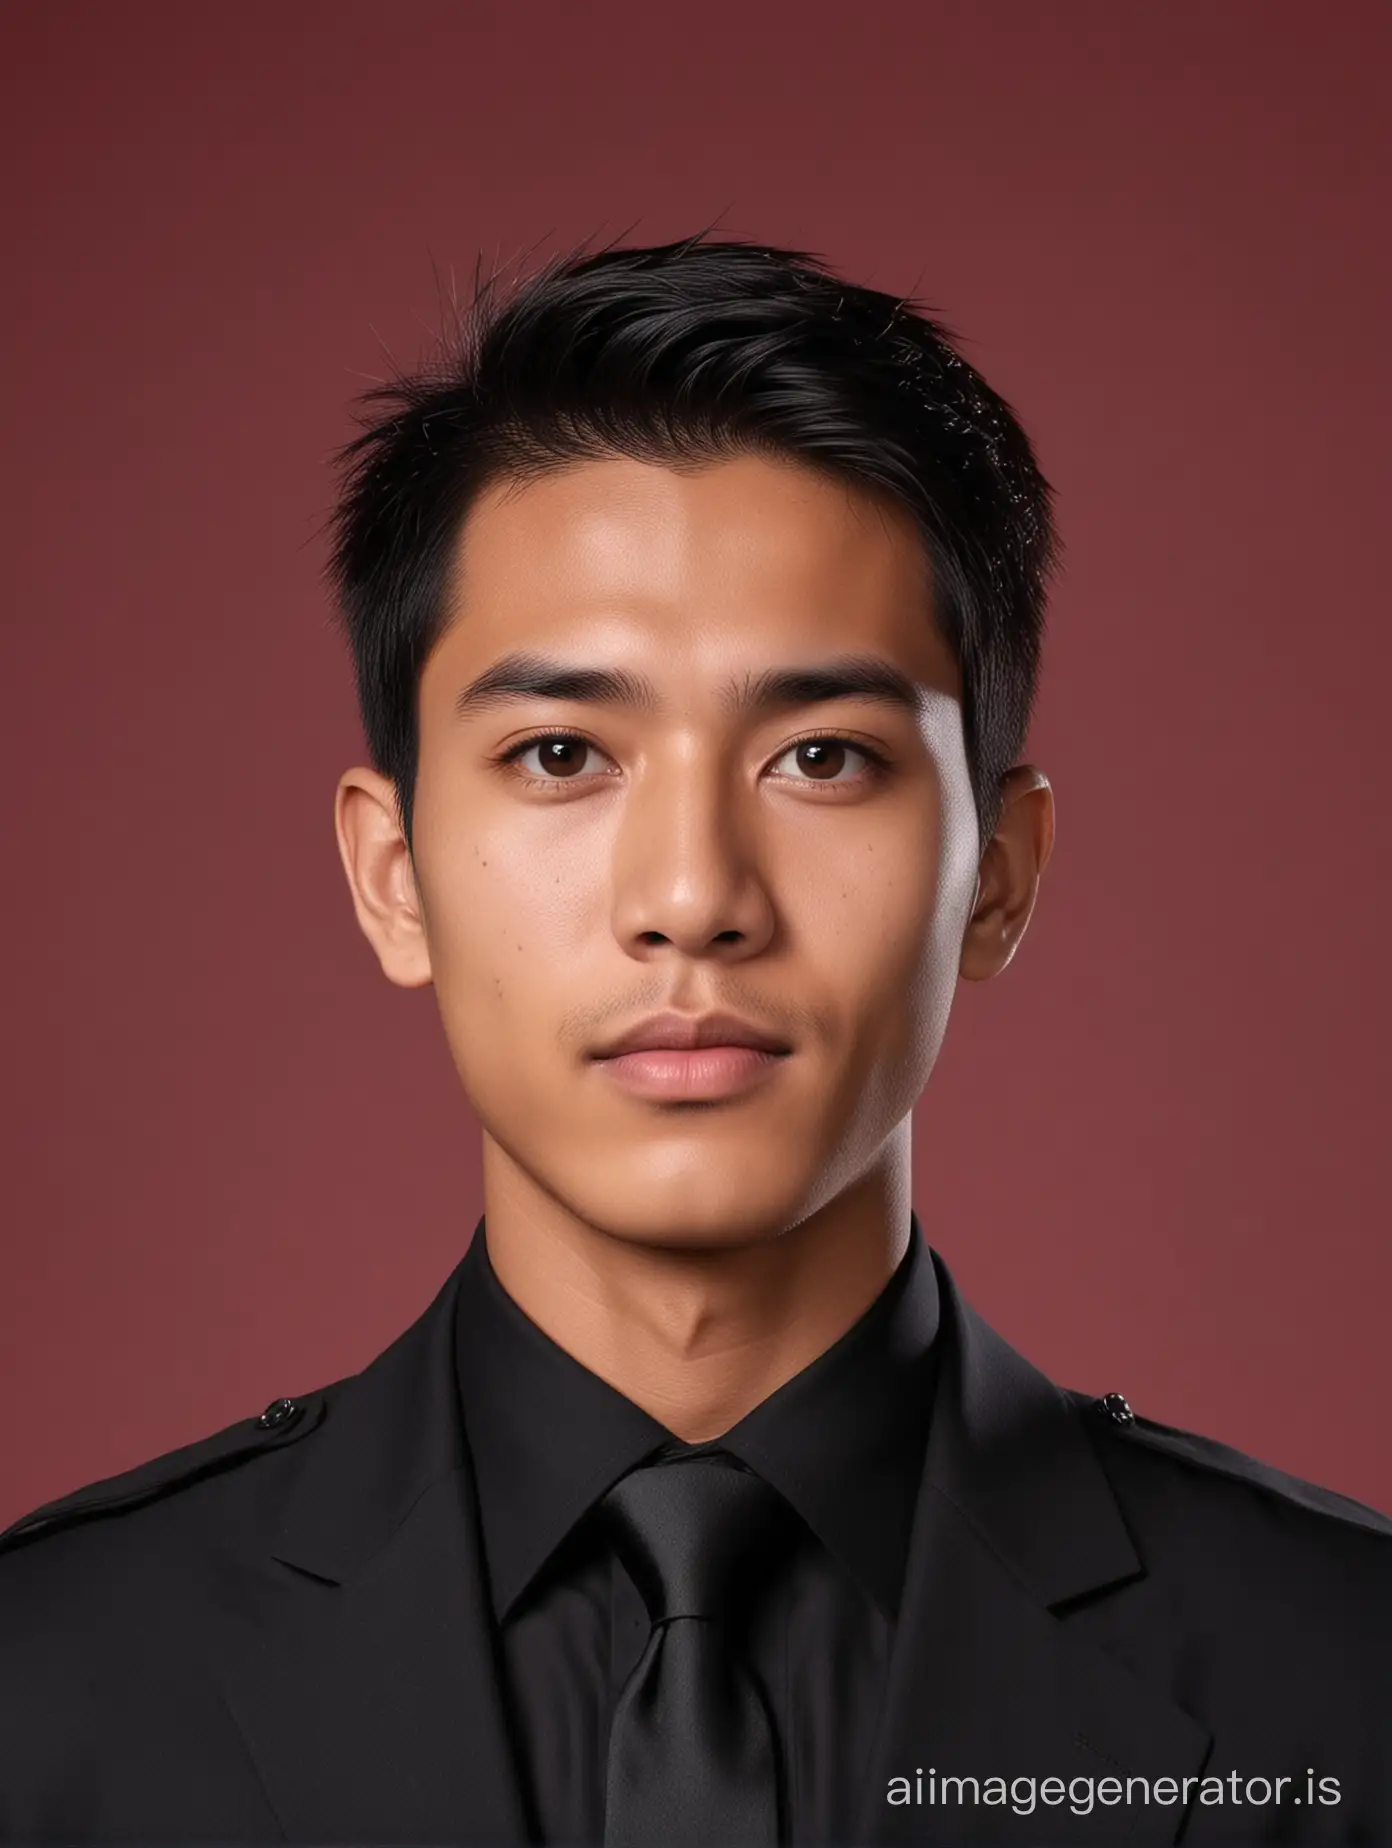 Indonesian-Young-Man-in-Black-Suit-and-Tie-for-Passport-Photo